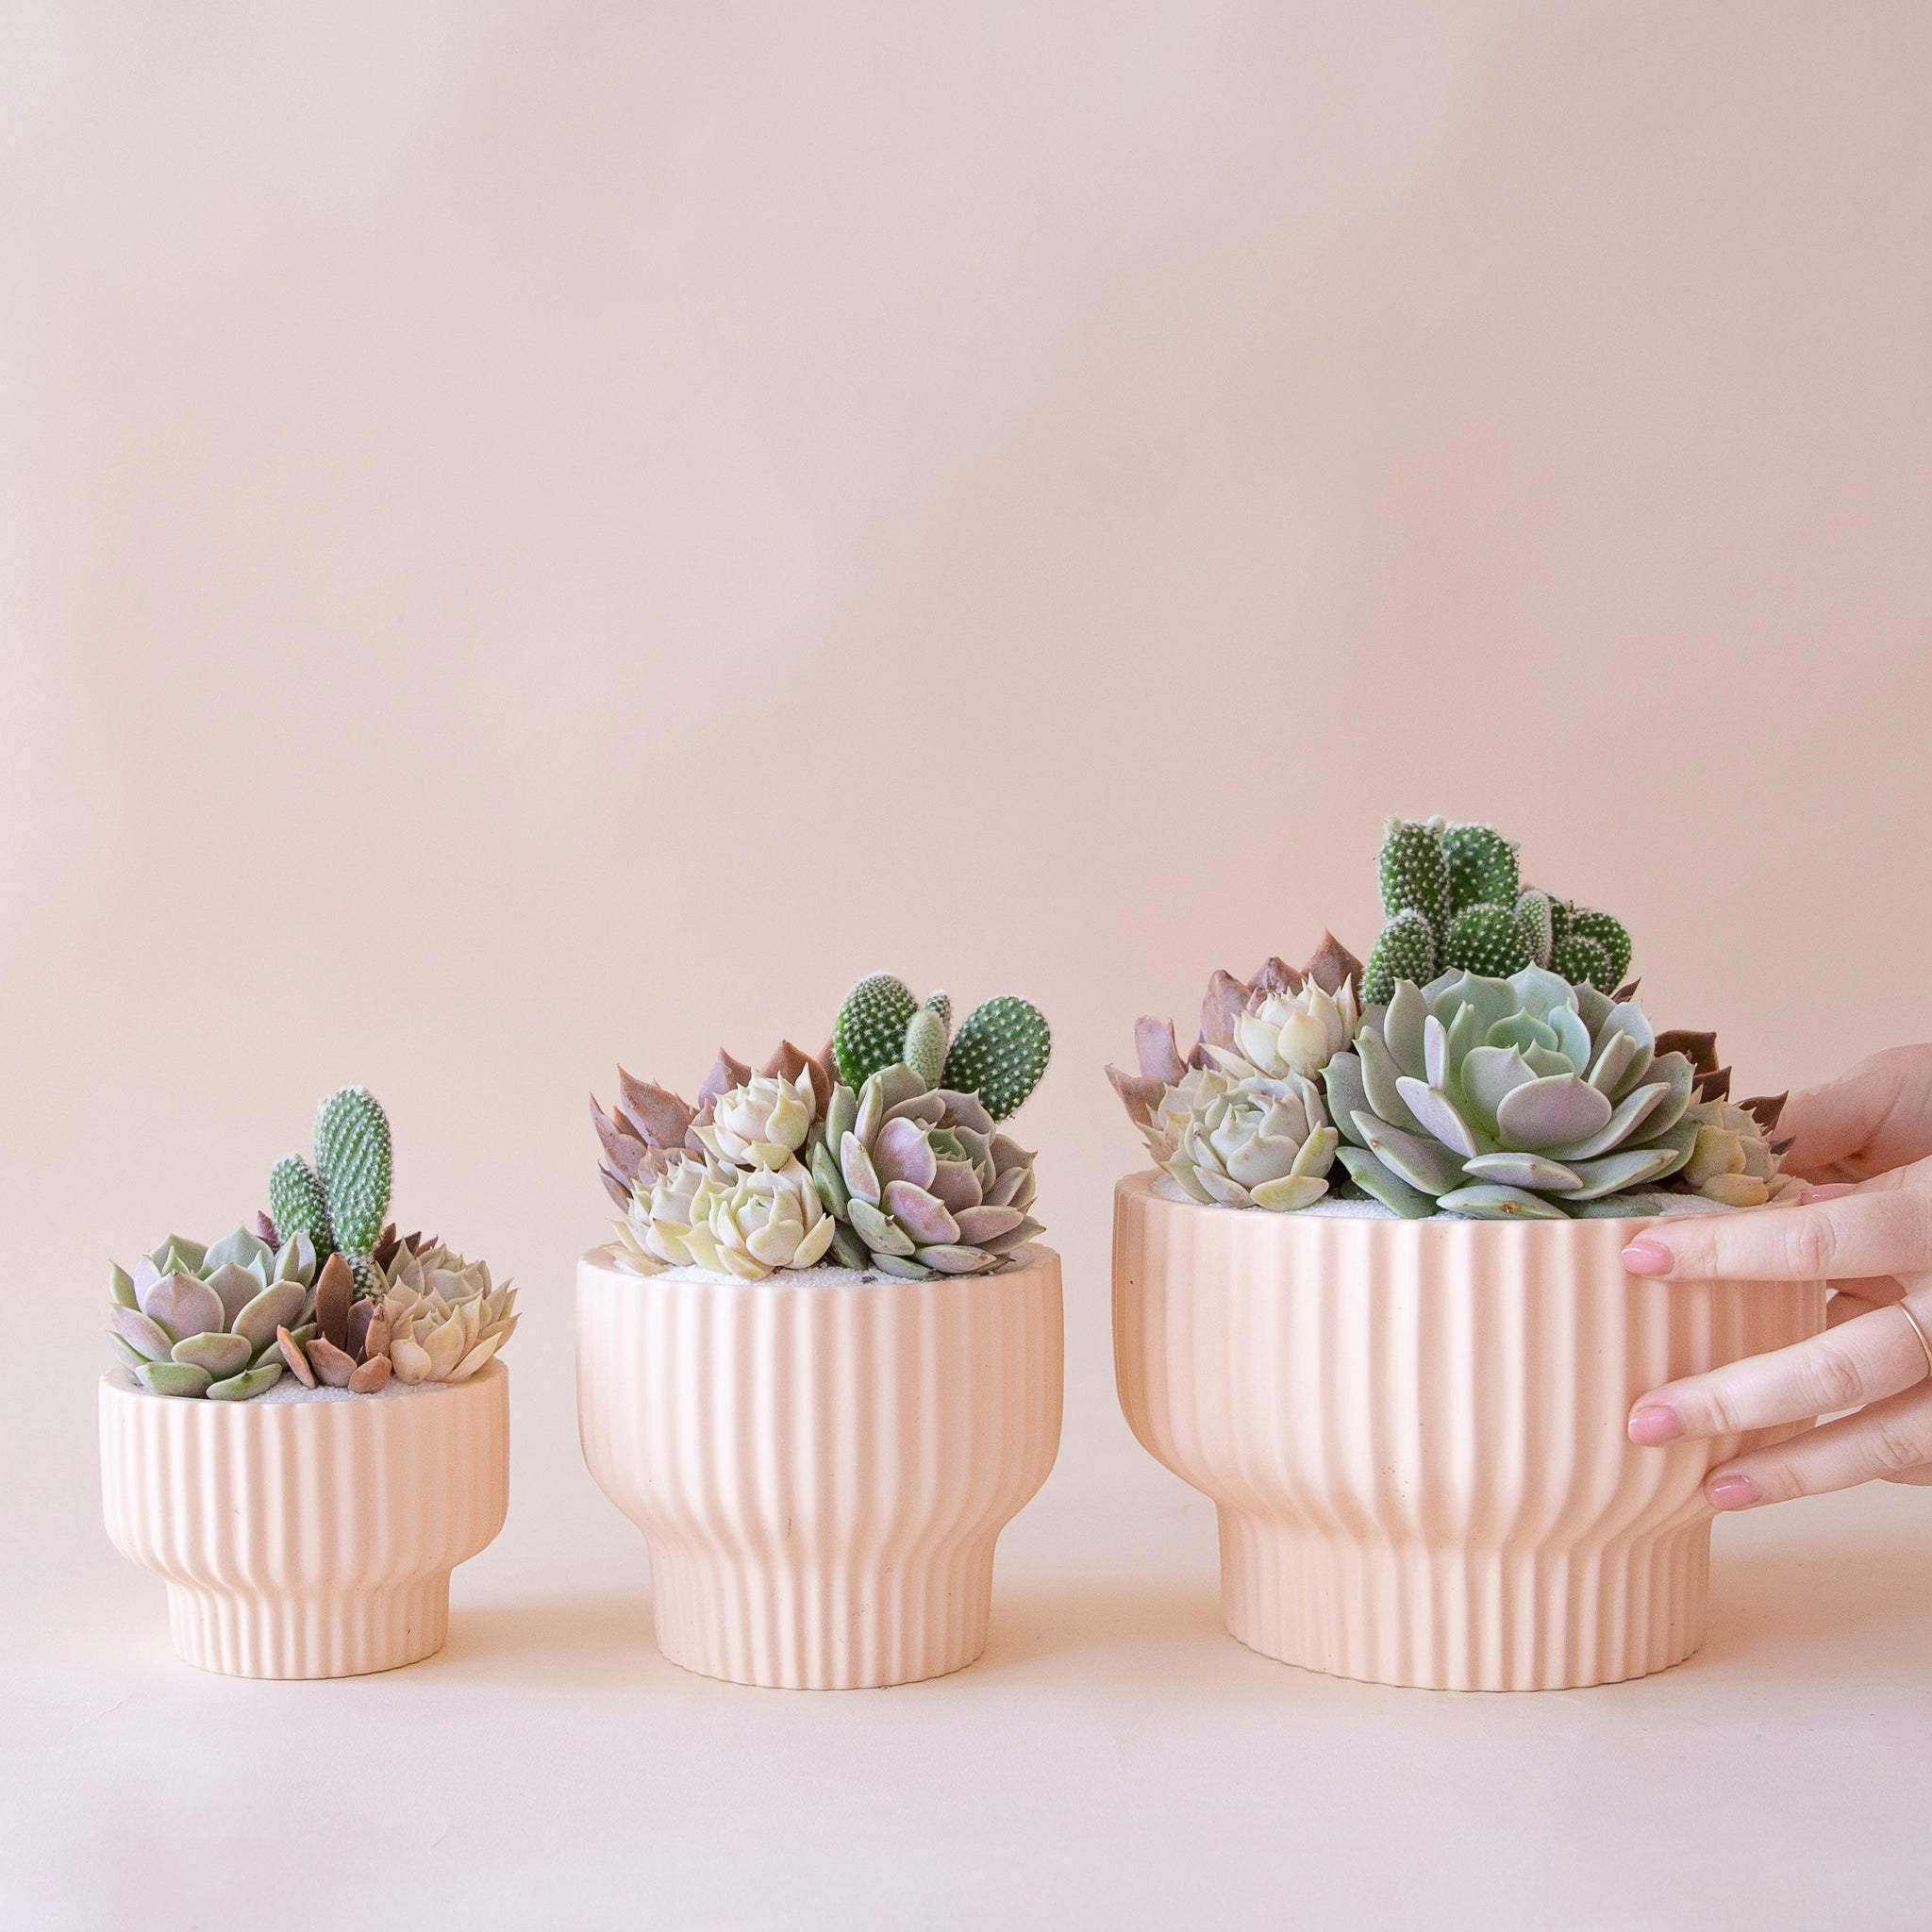 On a tan background is three sizes of the Presley pedestal pots in the light pink shade filled with cactus and succulent arrangements.